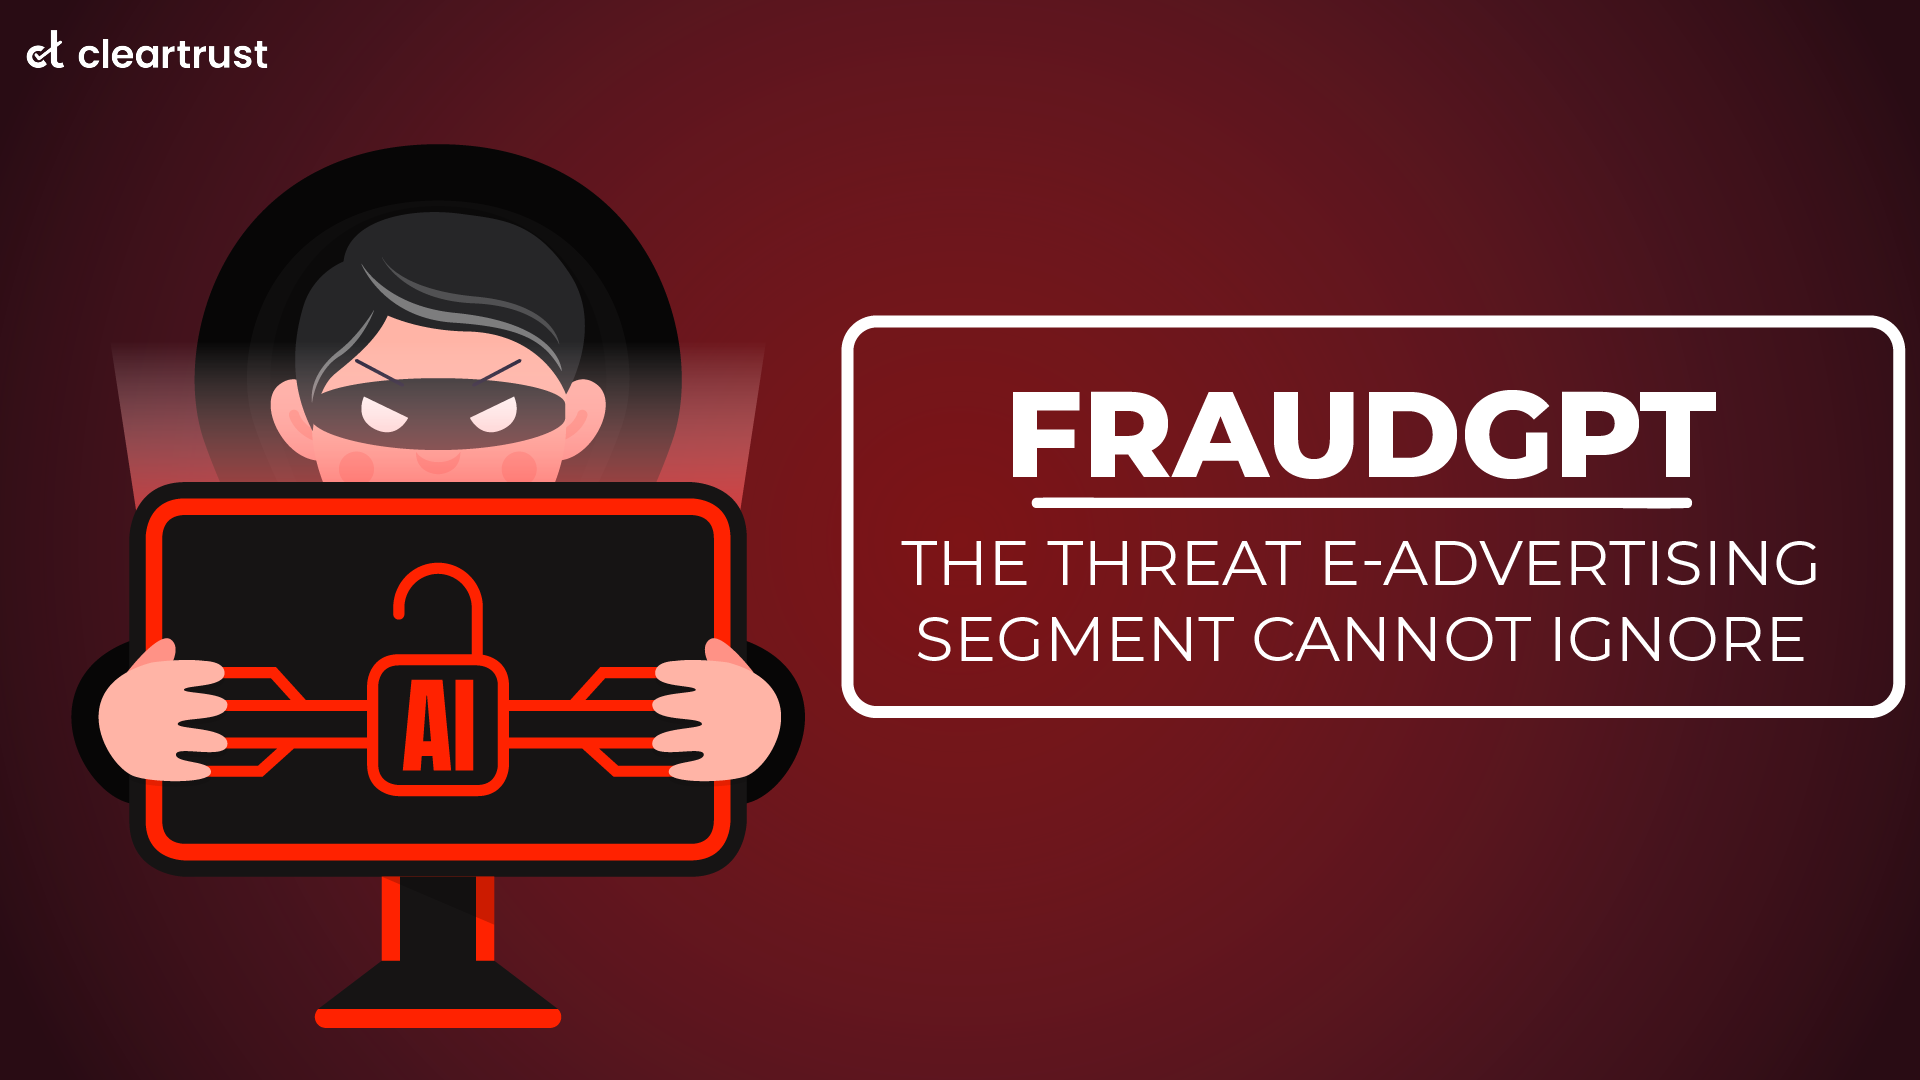 FraudGPT - The threat e-advertising segment cannot ignore